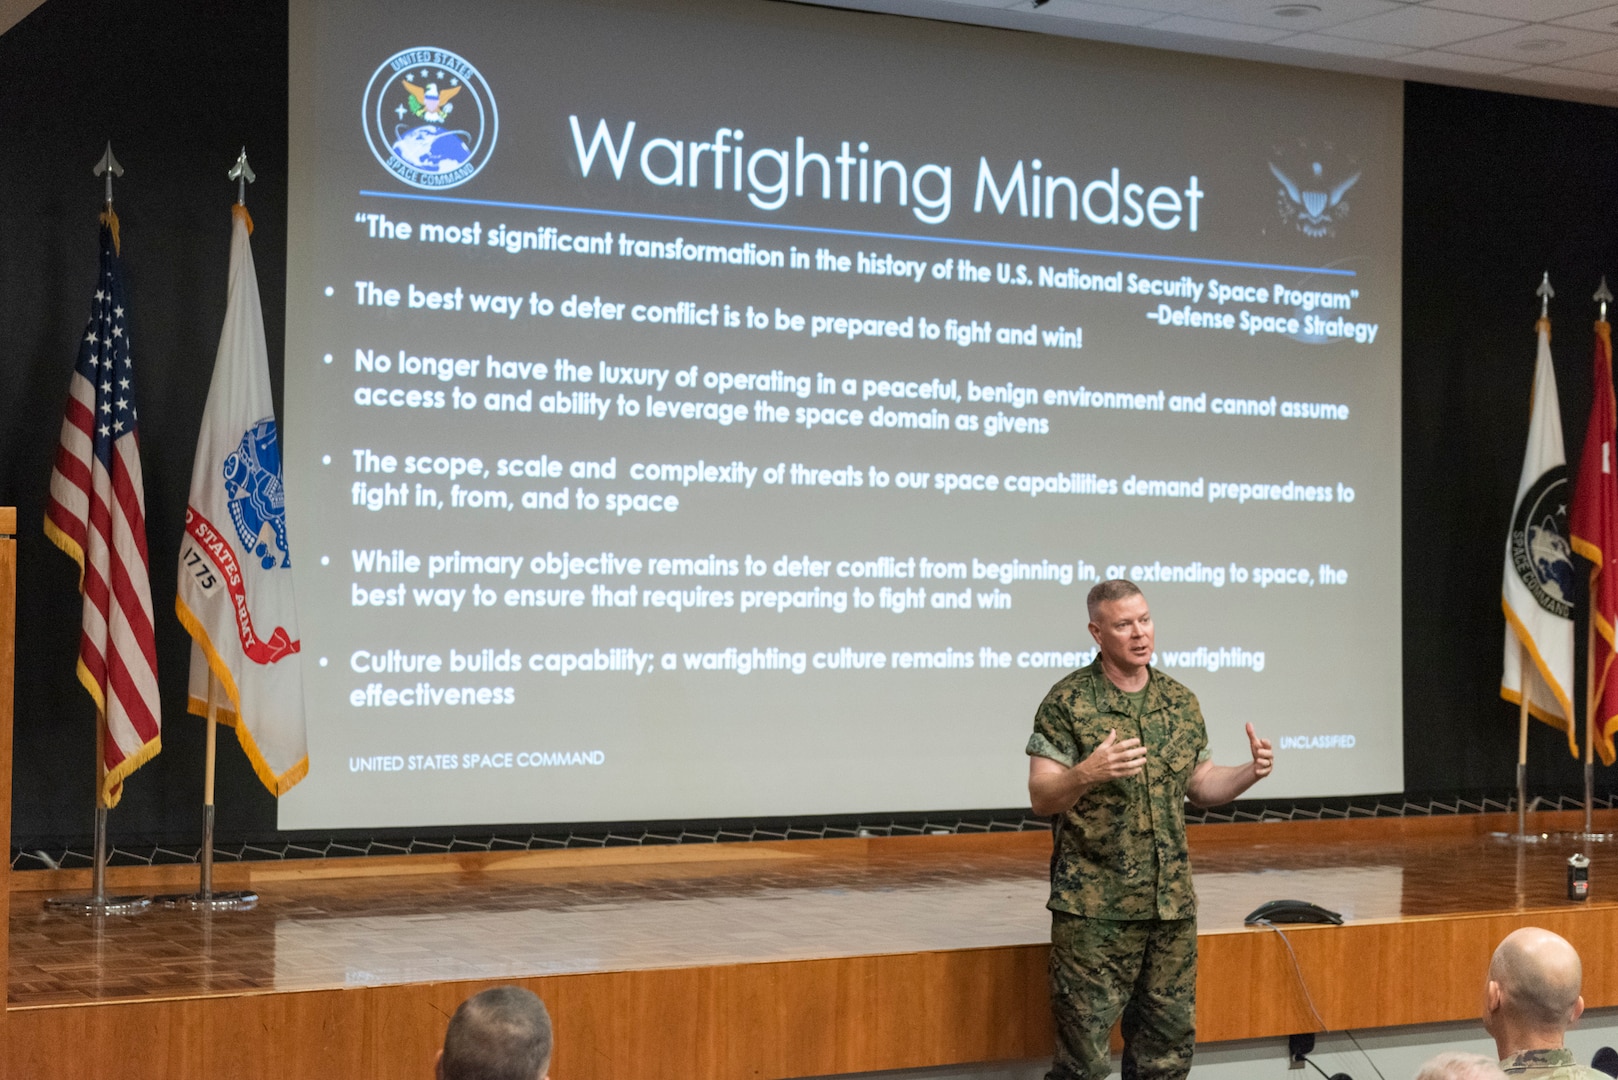 U.S. Army Gen. James Dickinson, U.S. Space Command commander, addresses the USSPACECOM staff on Aug. 31 for the first time since taking command Aug. 20 at Peterson Air Force Base.